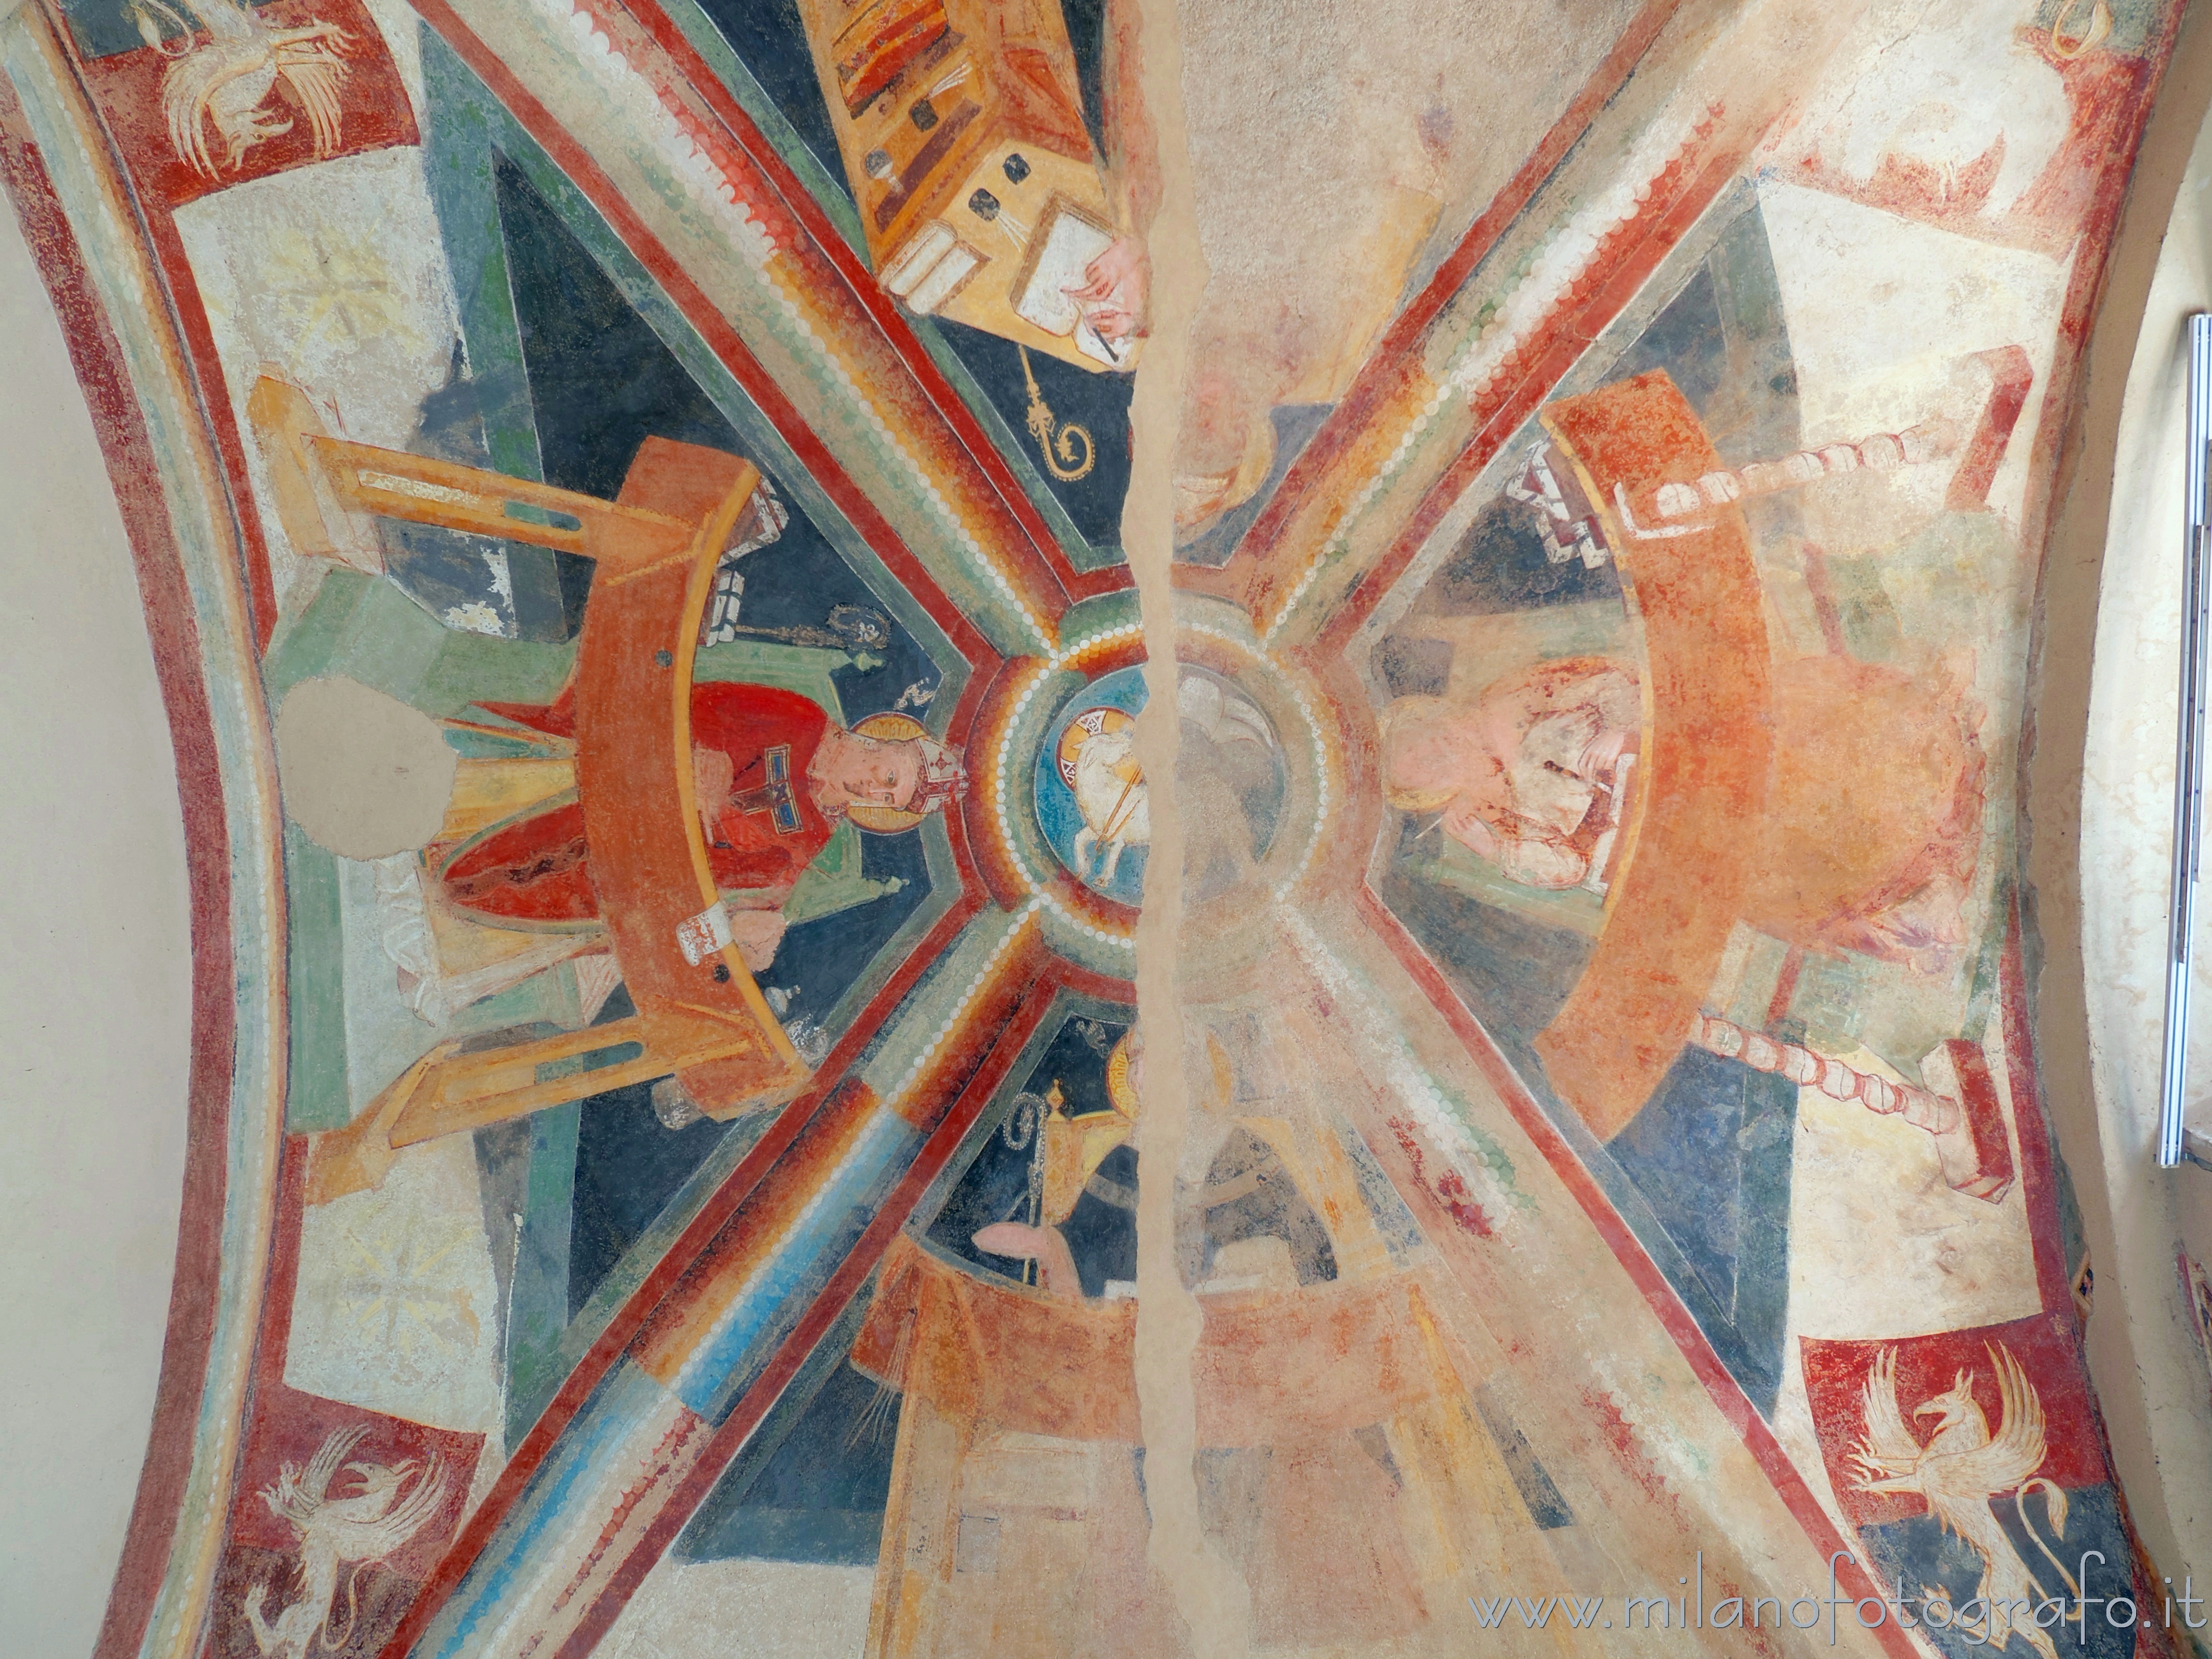 Vimercate (Monza e Brianza, Italy): Frescoes of the fourteenth century on the ceiling of the sacristy of the Church of Santo Stefano - Vimercate (Monza e Brianza, Italy)